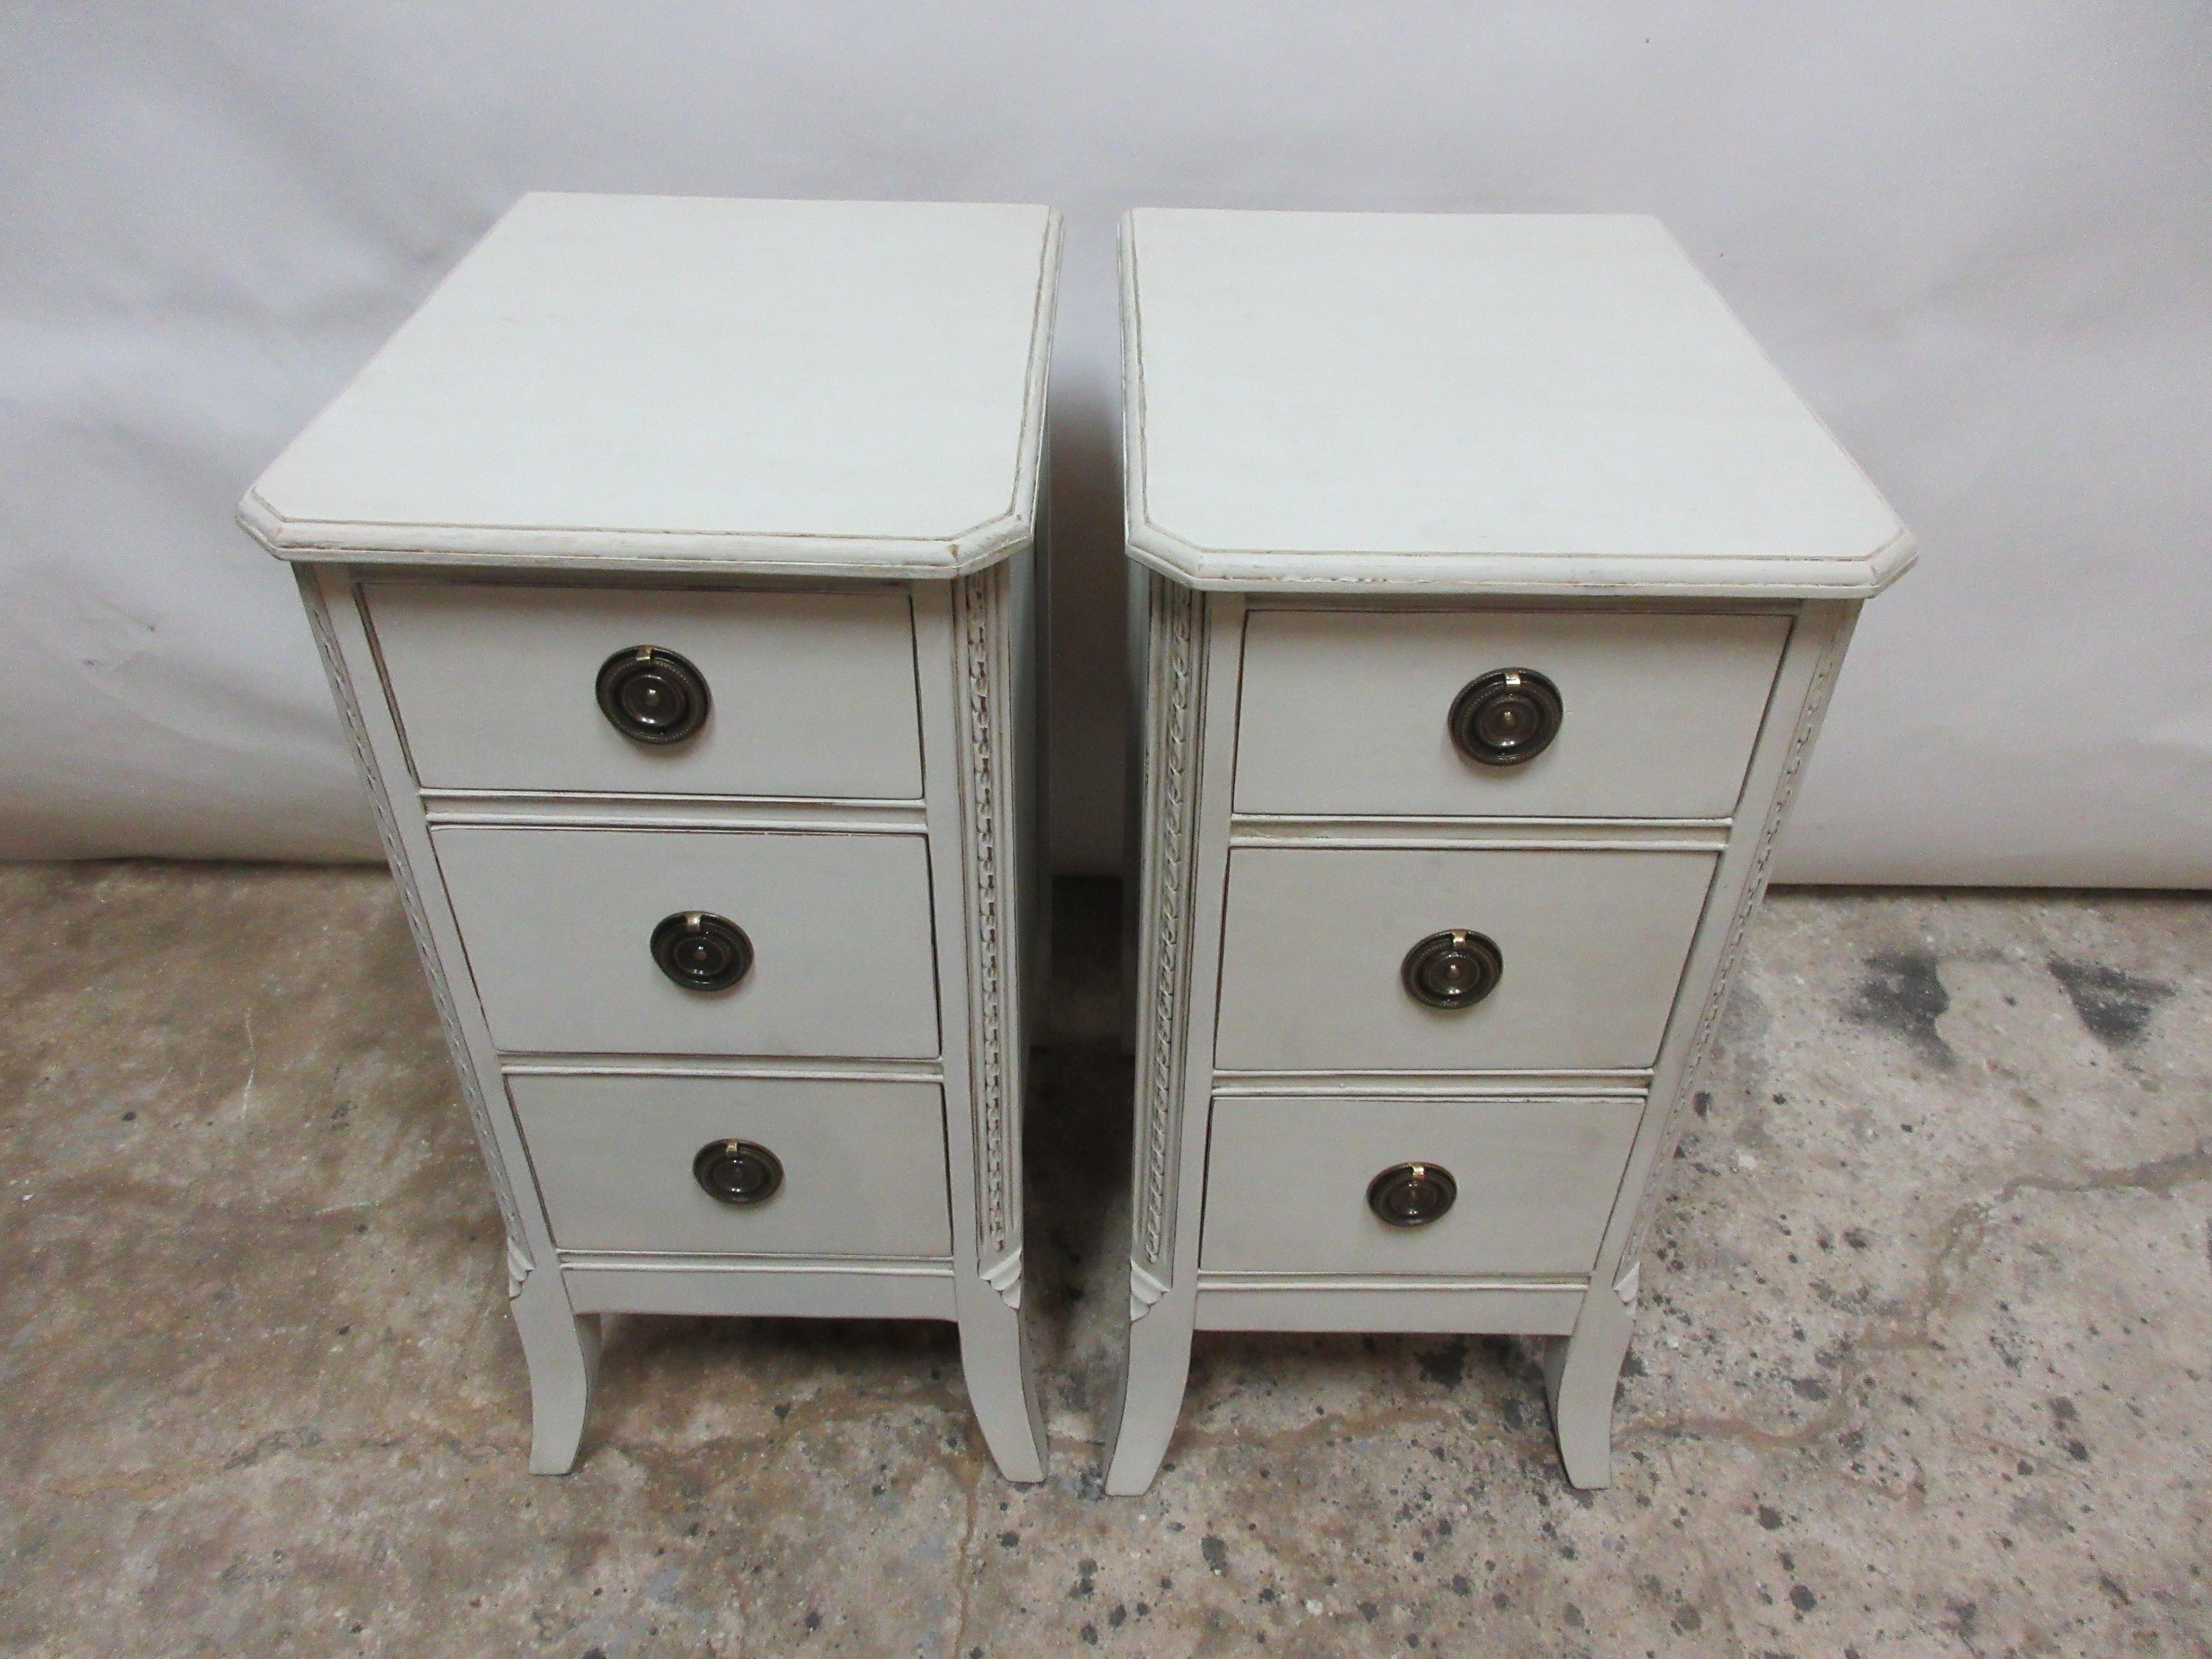 This is a set of 2 Gustavian style nightstands. They have been restored and repainted in milk paints 